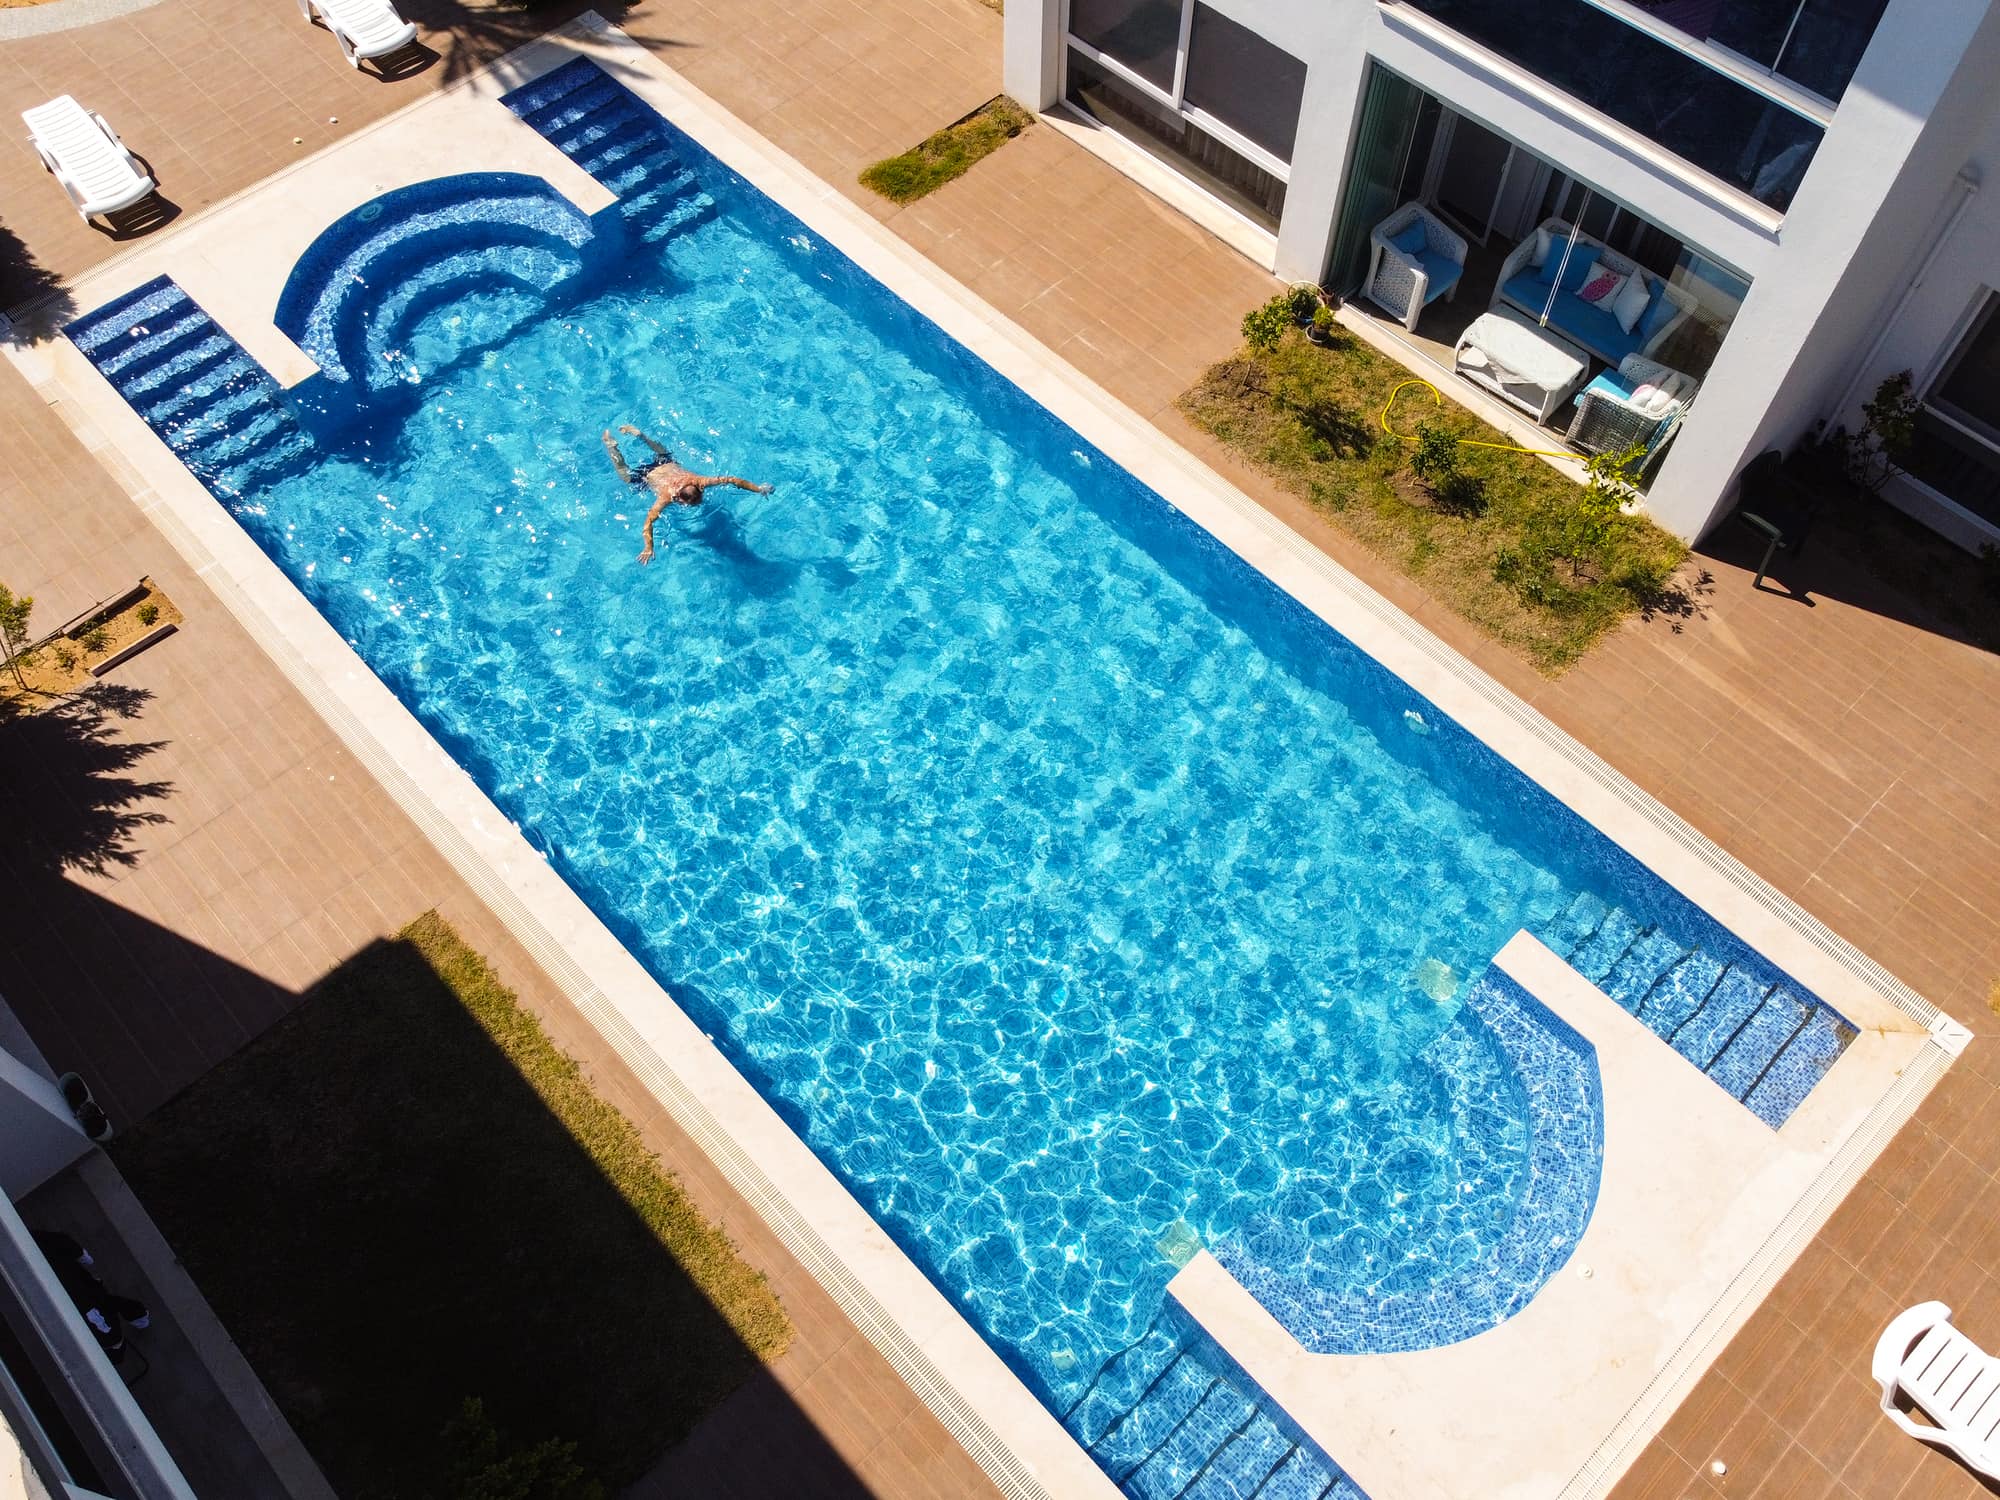 Pool business success begins with your Swimline partnership.